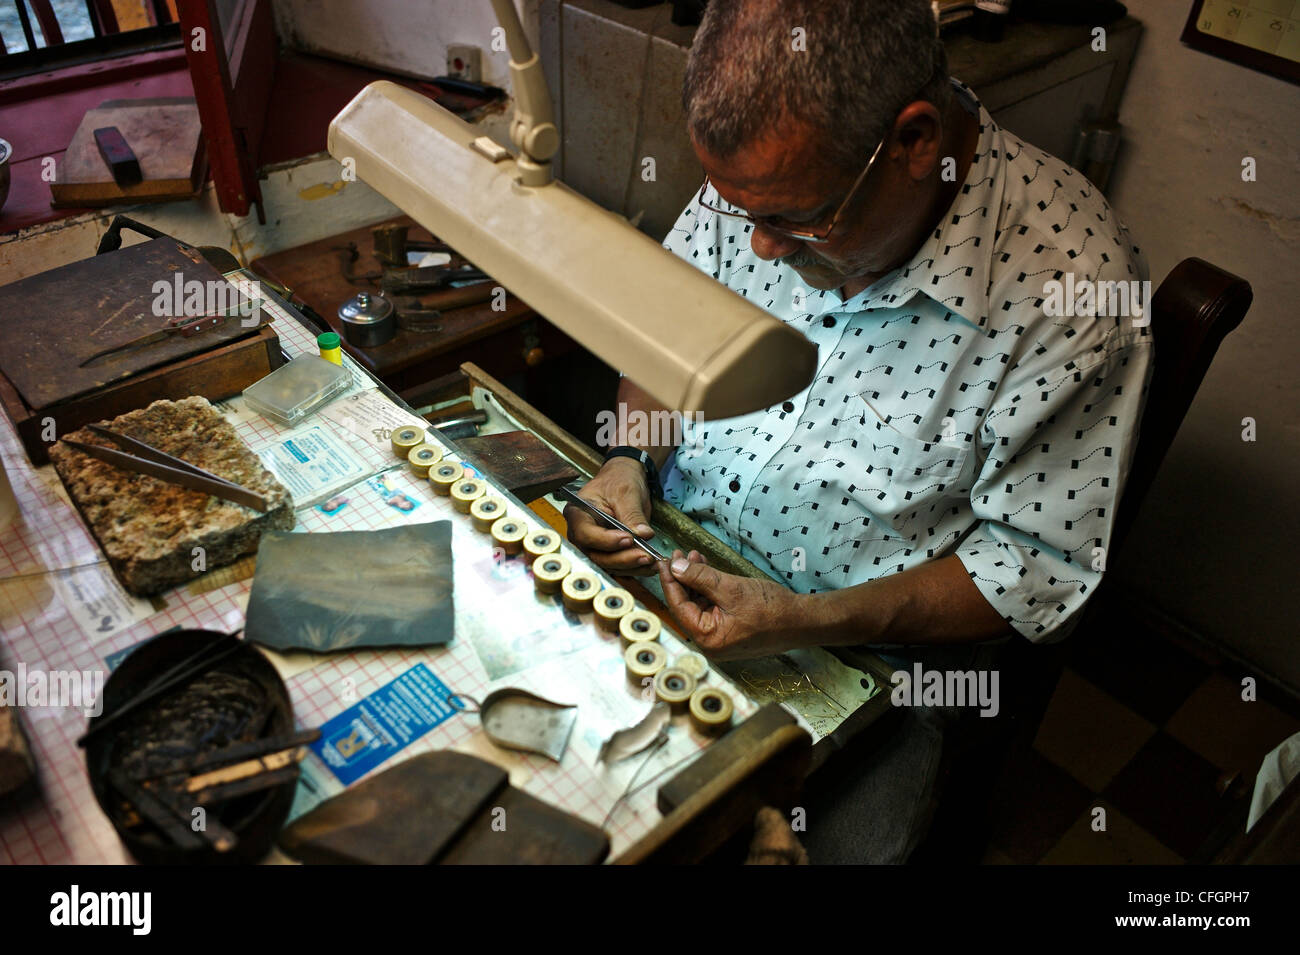 A worker fixing clocks. Stock Photo